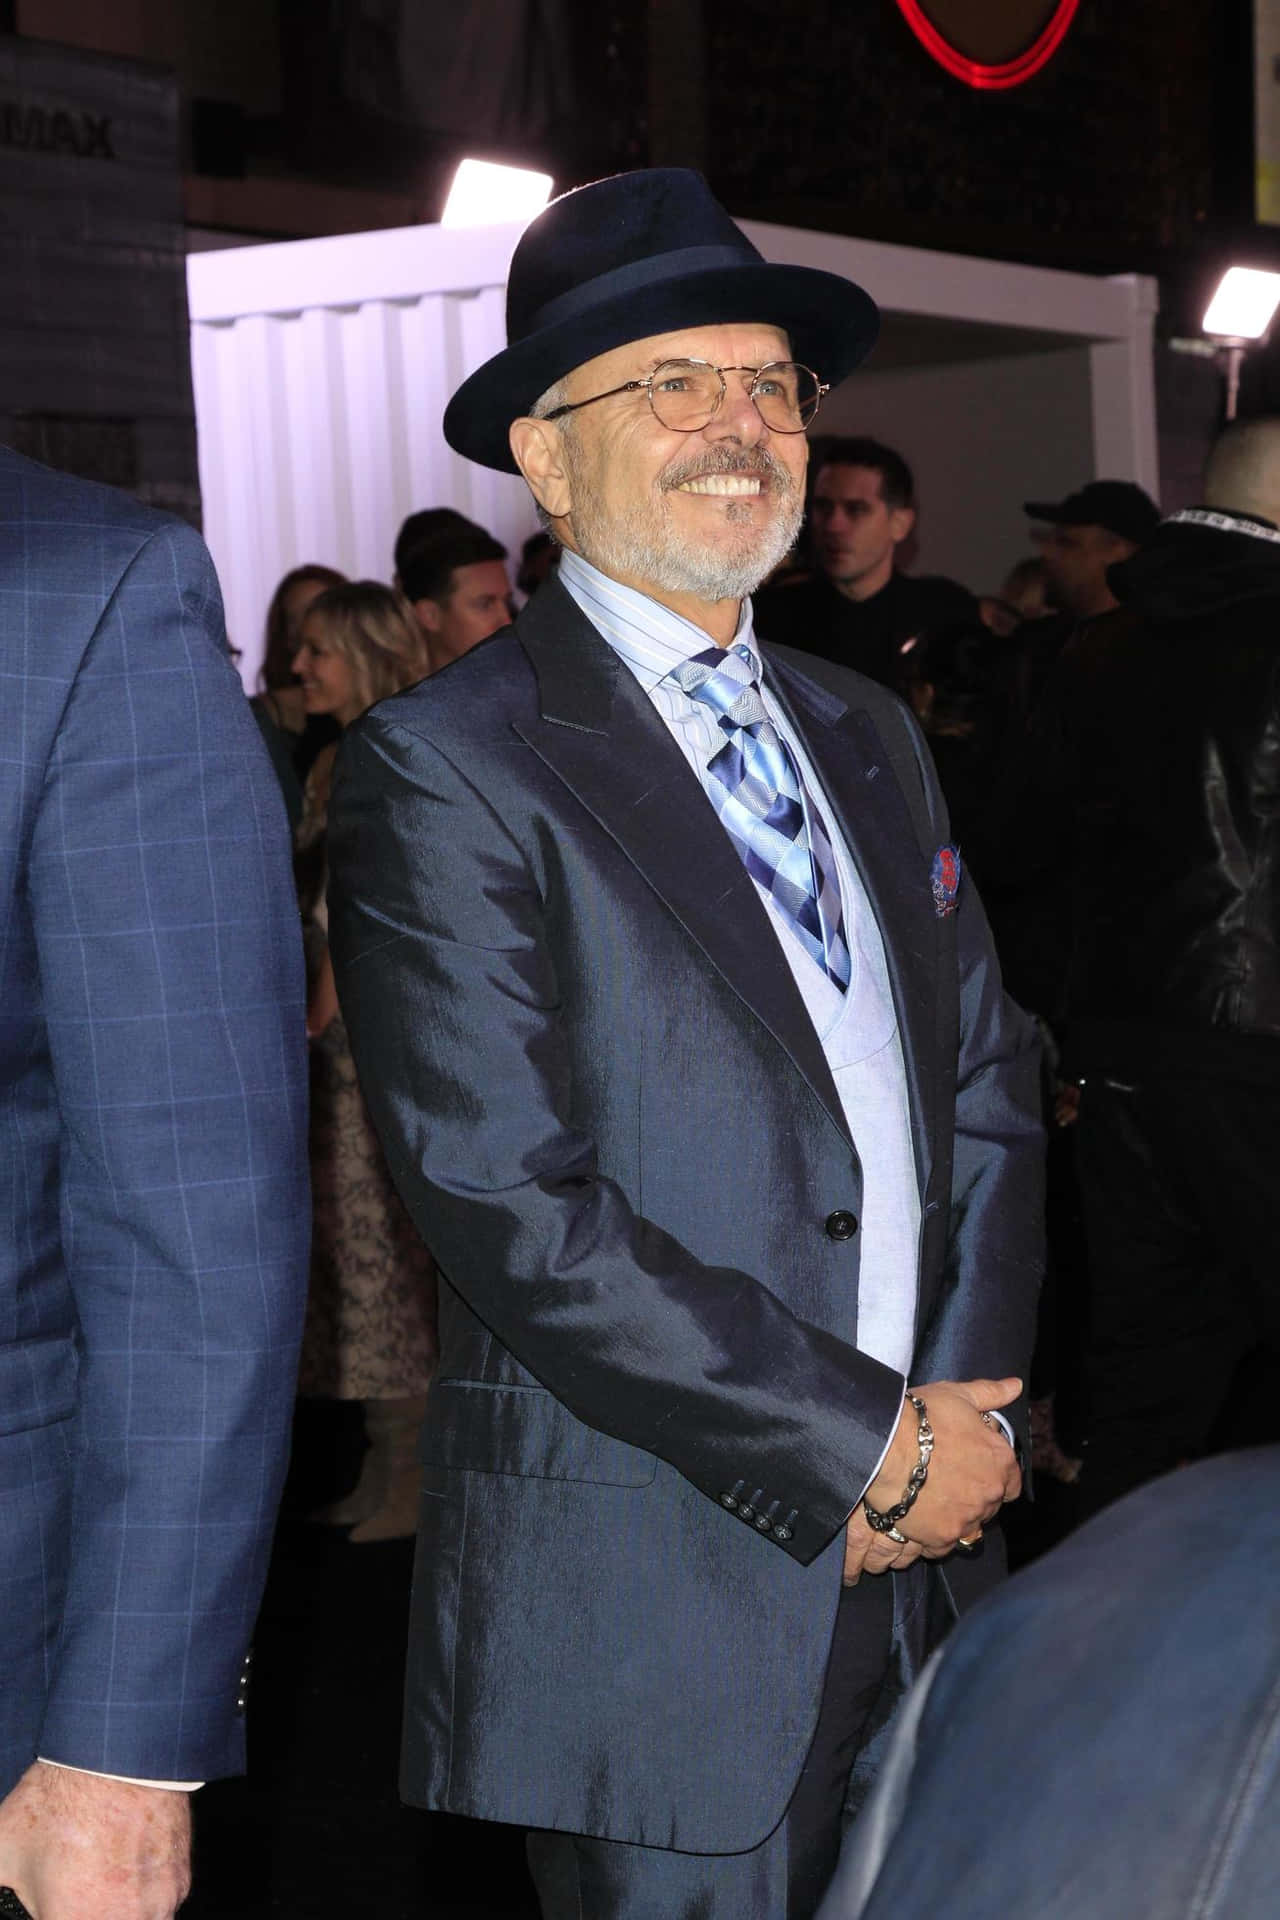 Joepantoliano Is An American Actor Known For His Roles In Various Films And Tv Shows. He Has Appeared In Well-known Productions Such As 